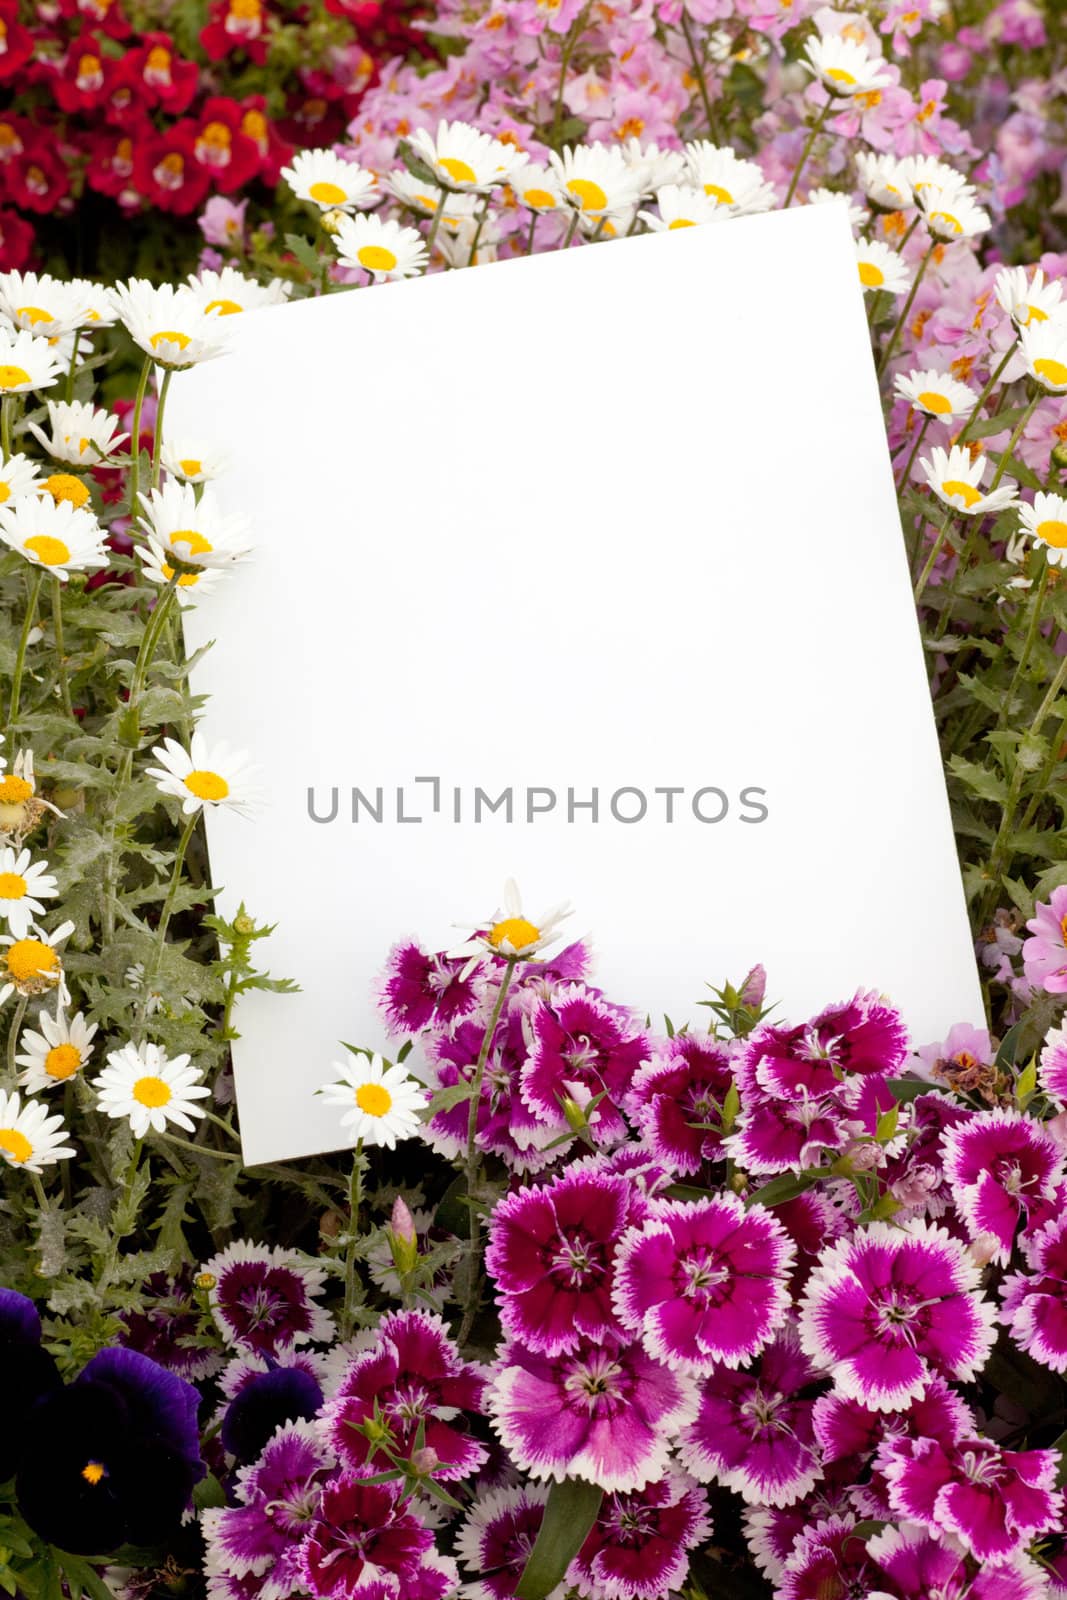 Garden flowers with white copyspace for your greeting message